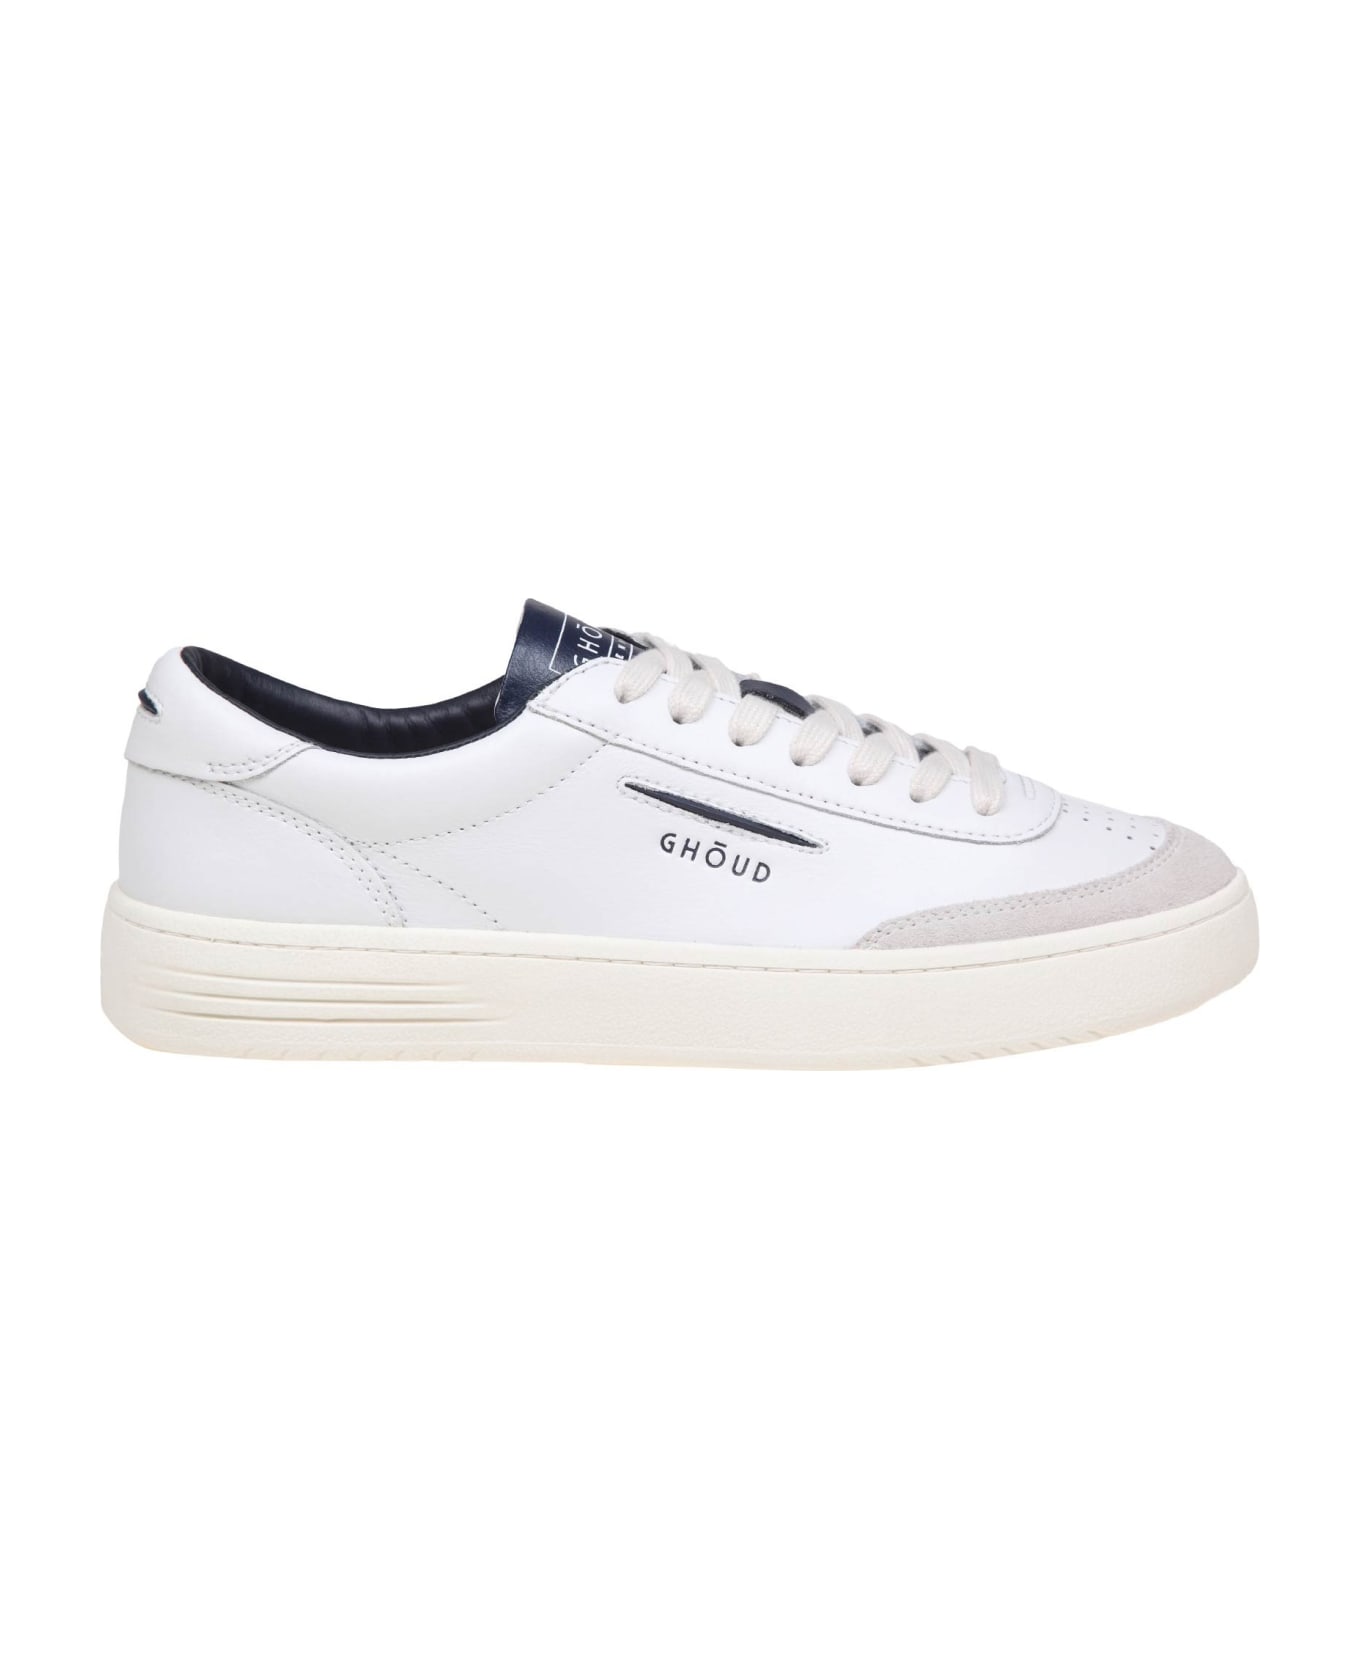 GHOUD Lido Low Sneakers In White/blue Leather And Suede - Blue スニーカー